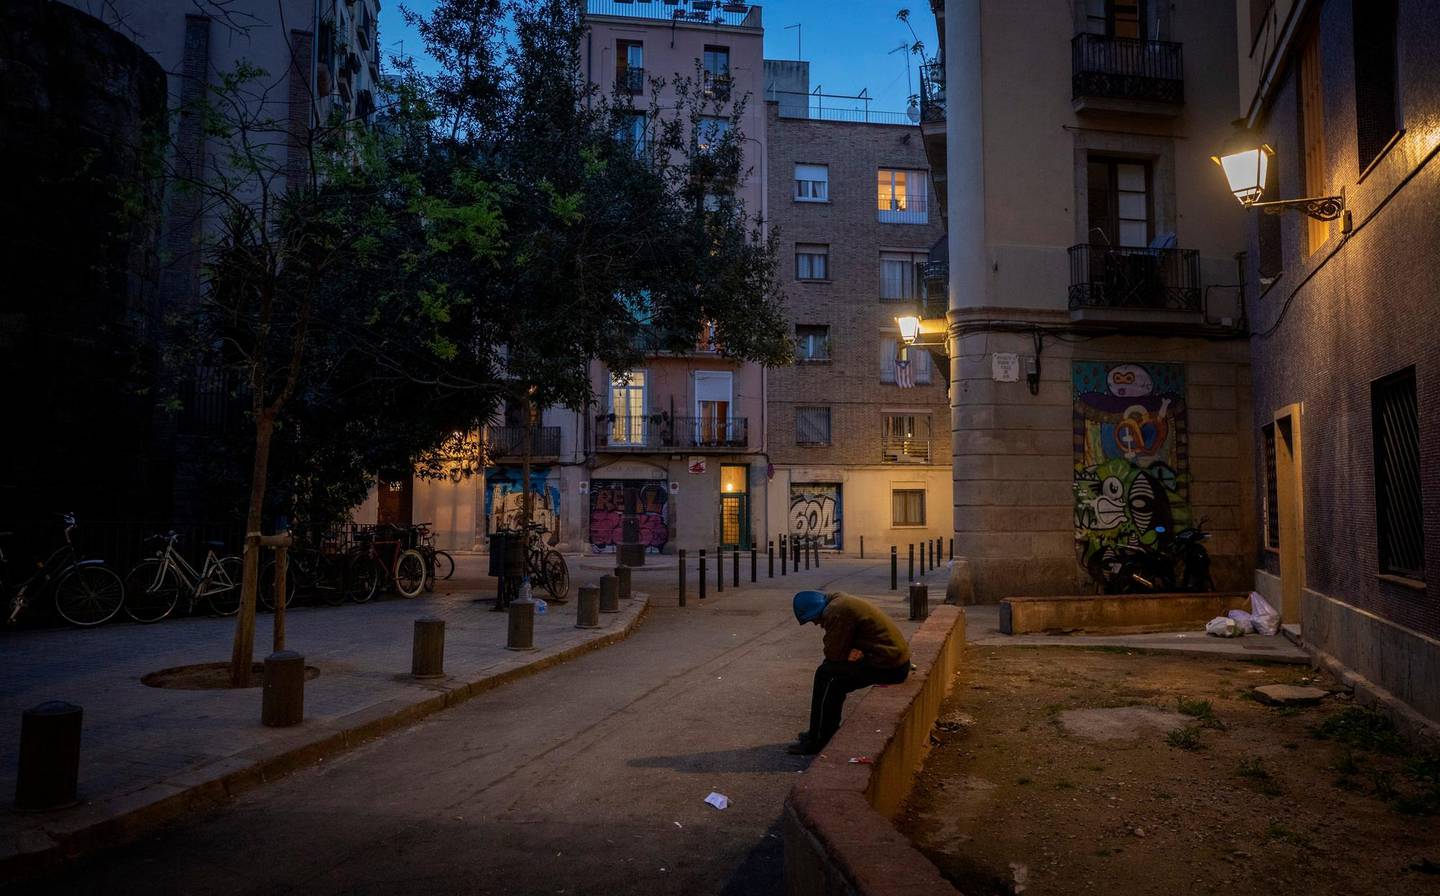 In this Friday, March 20, 2020 photo, Gana Gutierrez sits in an empty street in Barcelona, Spain. "It is as if there has been a nuclear explosion and they are all sheltering in the bunker. Only us, the homeless, are left out " explains 36-year-old Gana, who has lived on the street for more than 8 years and comments that the slogan. "quedateencasa" (Stayathome) is only for those who have a roof over their heads but not for them. (AP Photo/Emilio Morenatti)